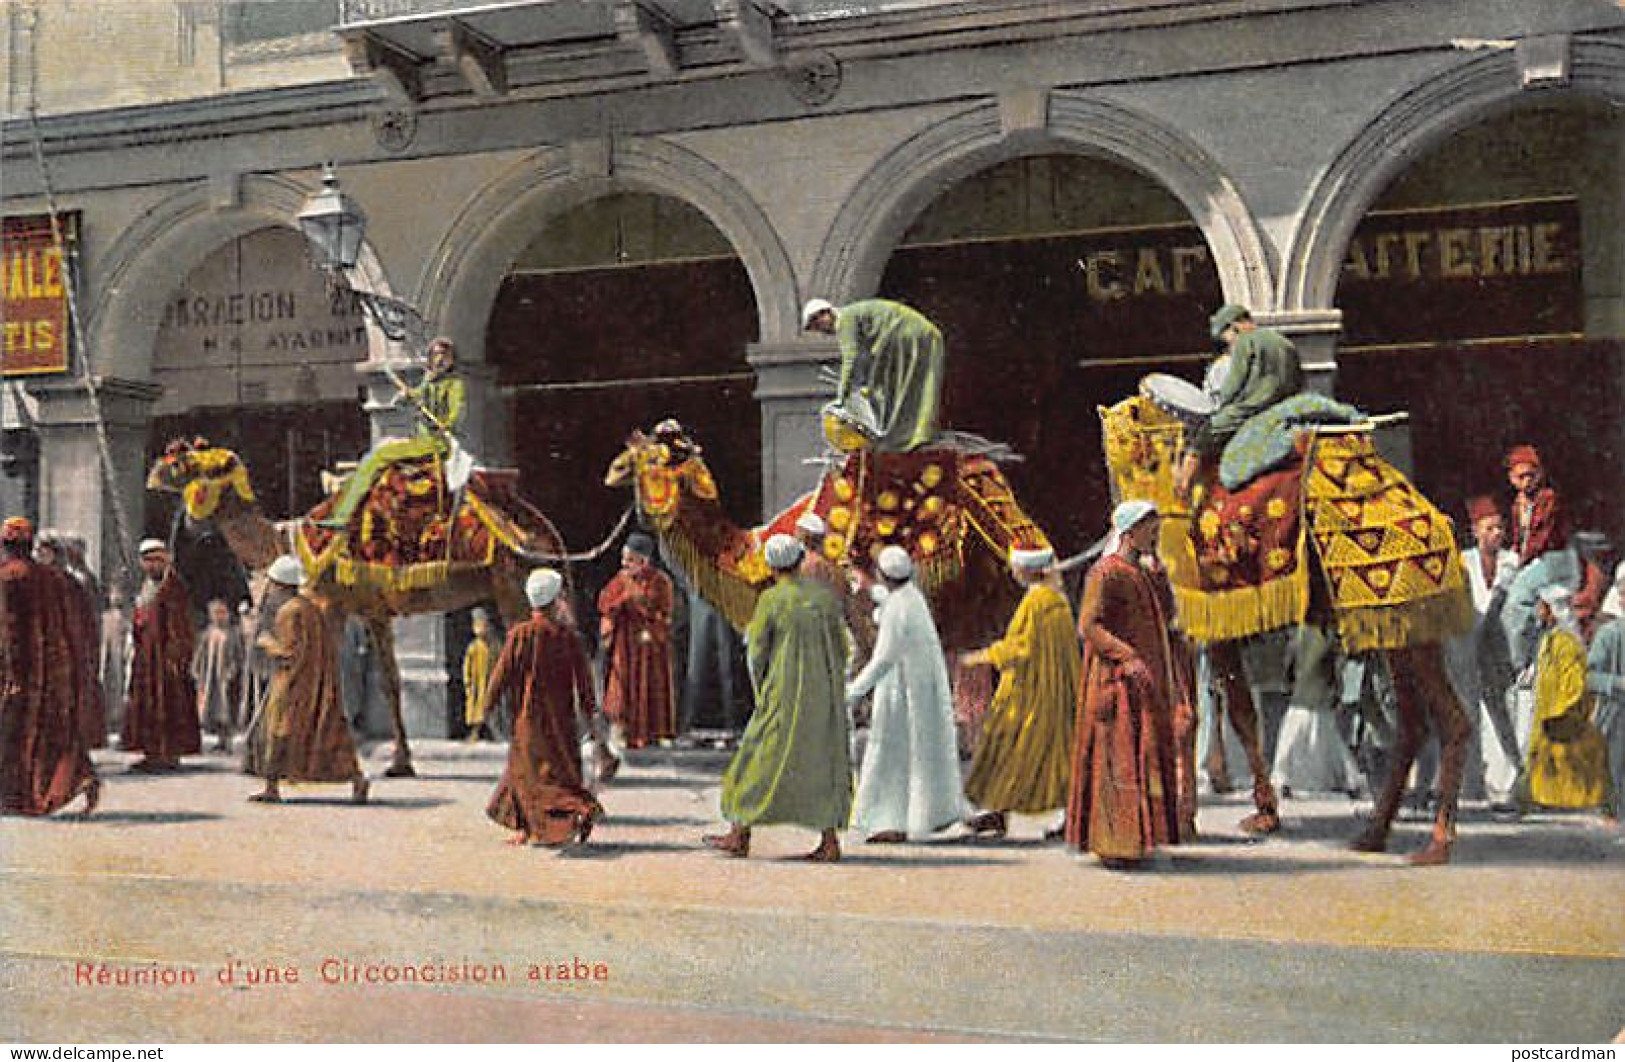 Egypt - Celebration On The Occasion Of An Arab Circumcision - Publ. The Cairo Postcard Trust 54701 - Personnes